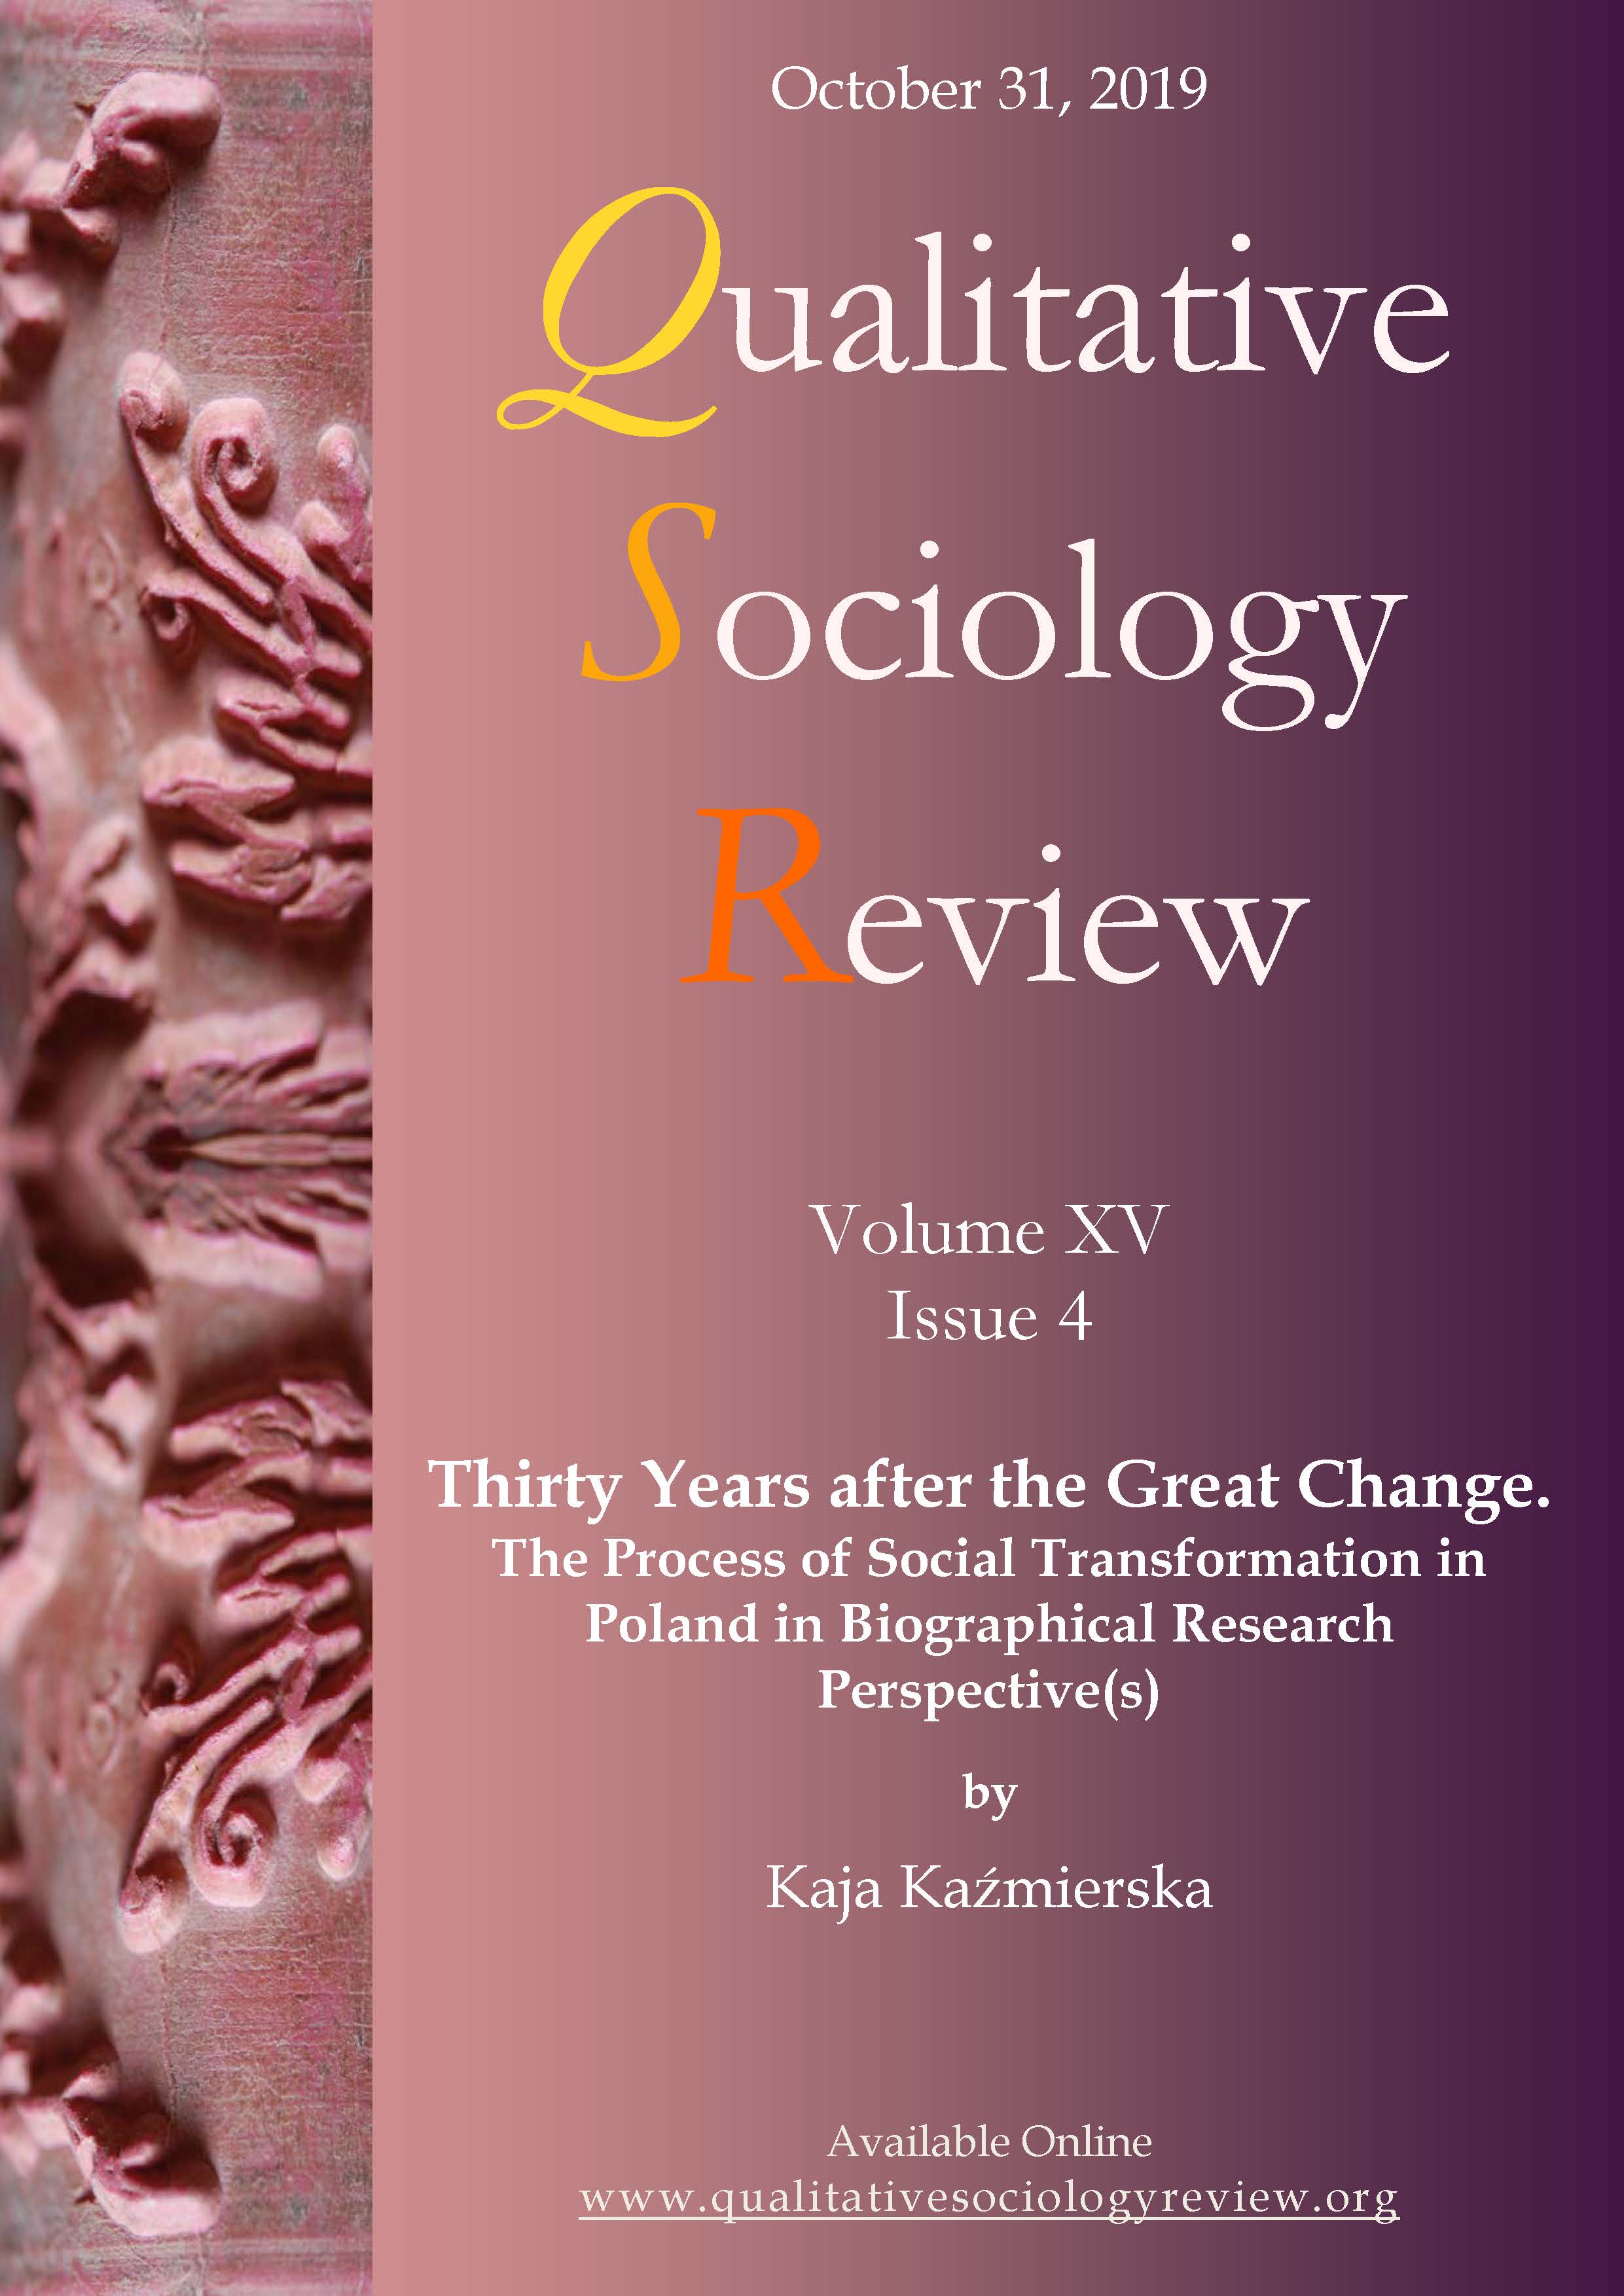 Thirty Years after the Great Change. The Process of Social Transformation in Poland in Biographical Research Perspective(s)